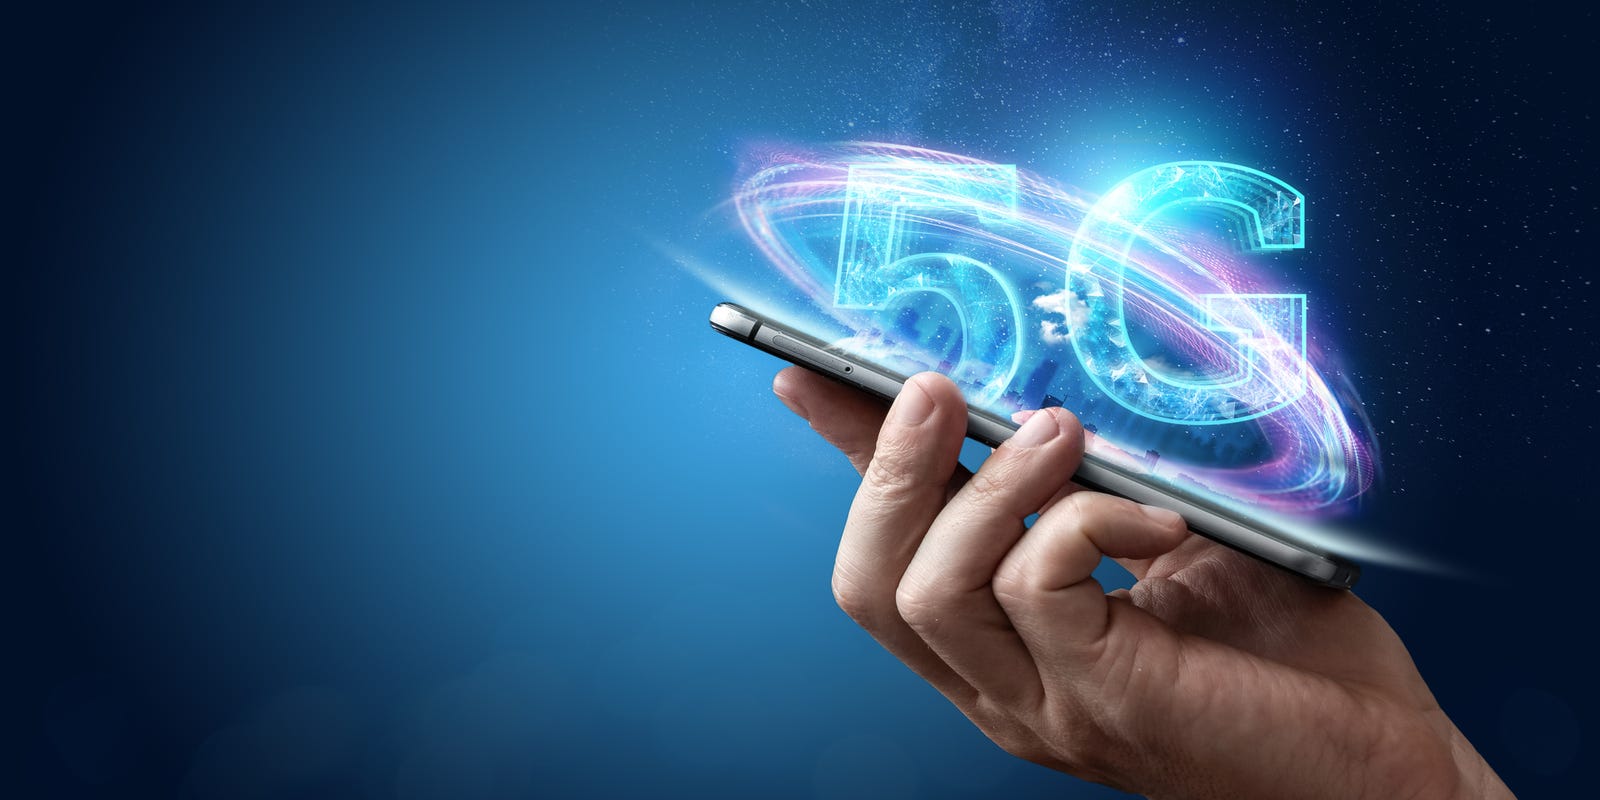 Verizon, Sprint, T Mobile, AT&T: Should I Buy Into 5G Now?